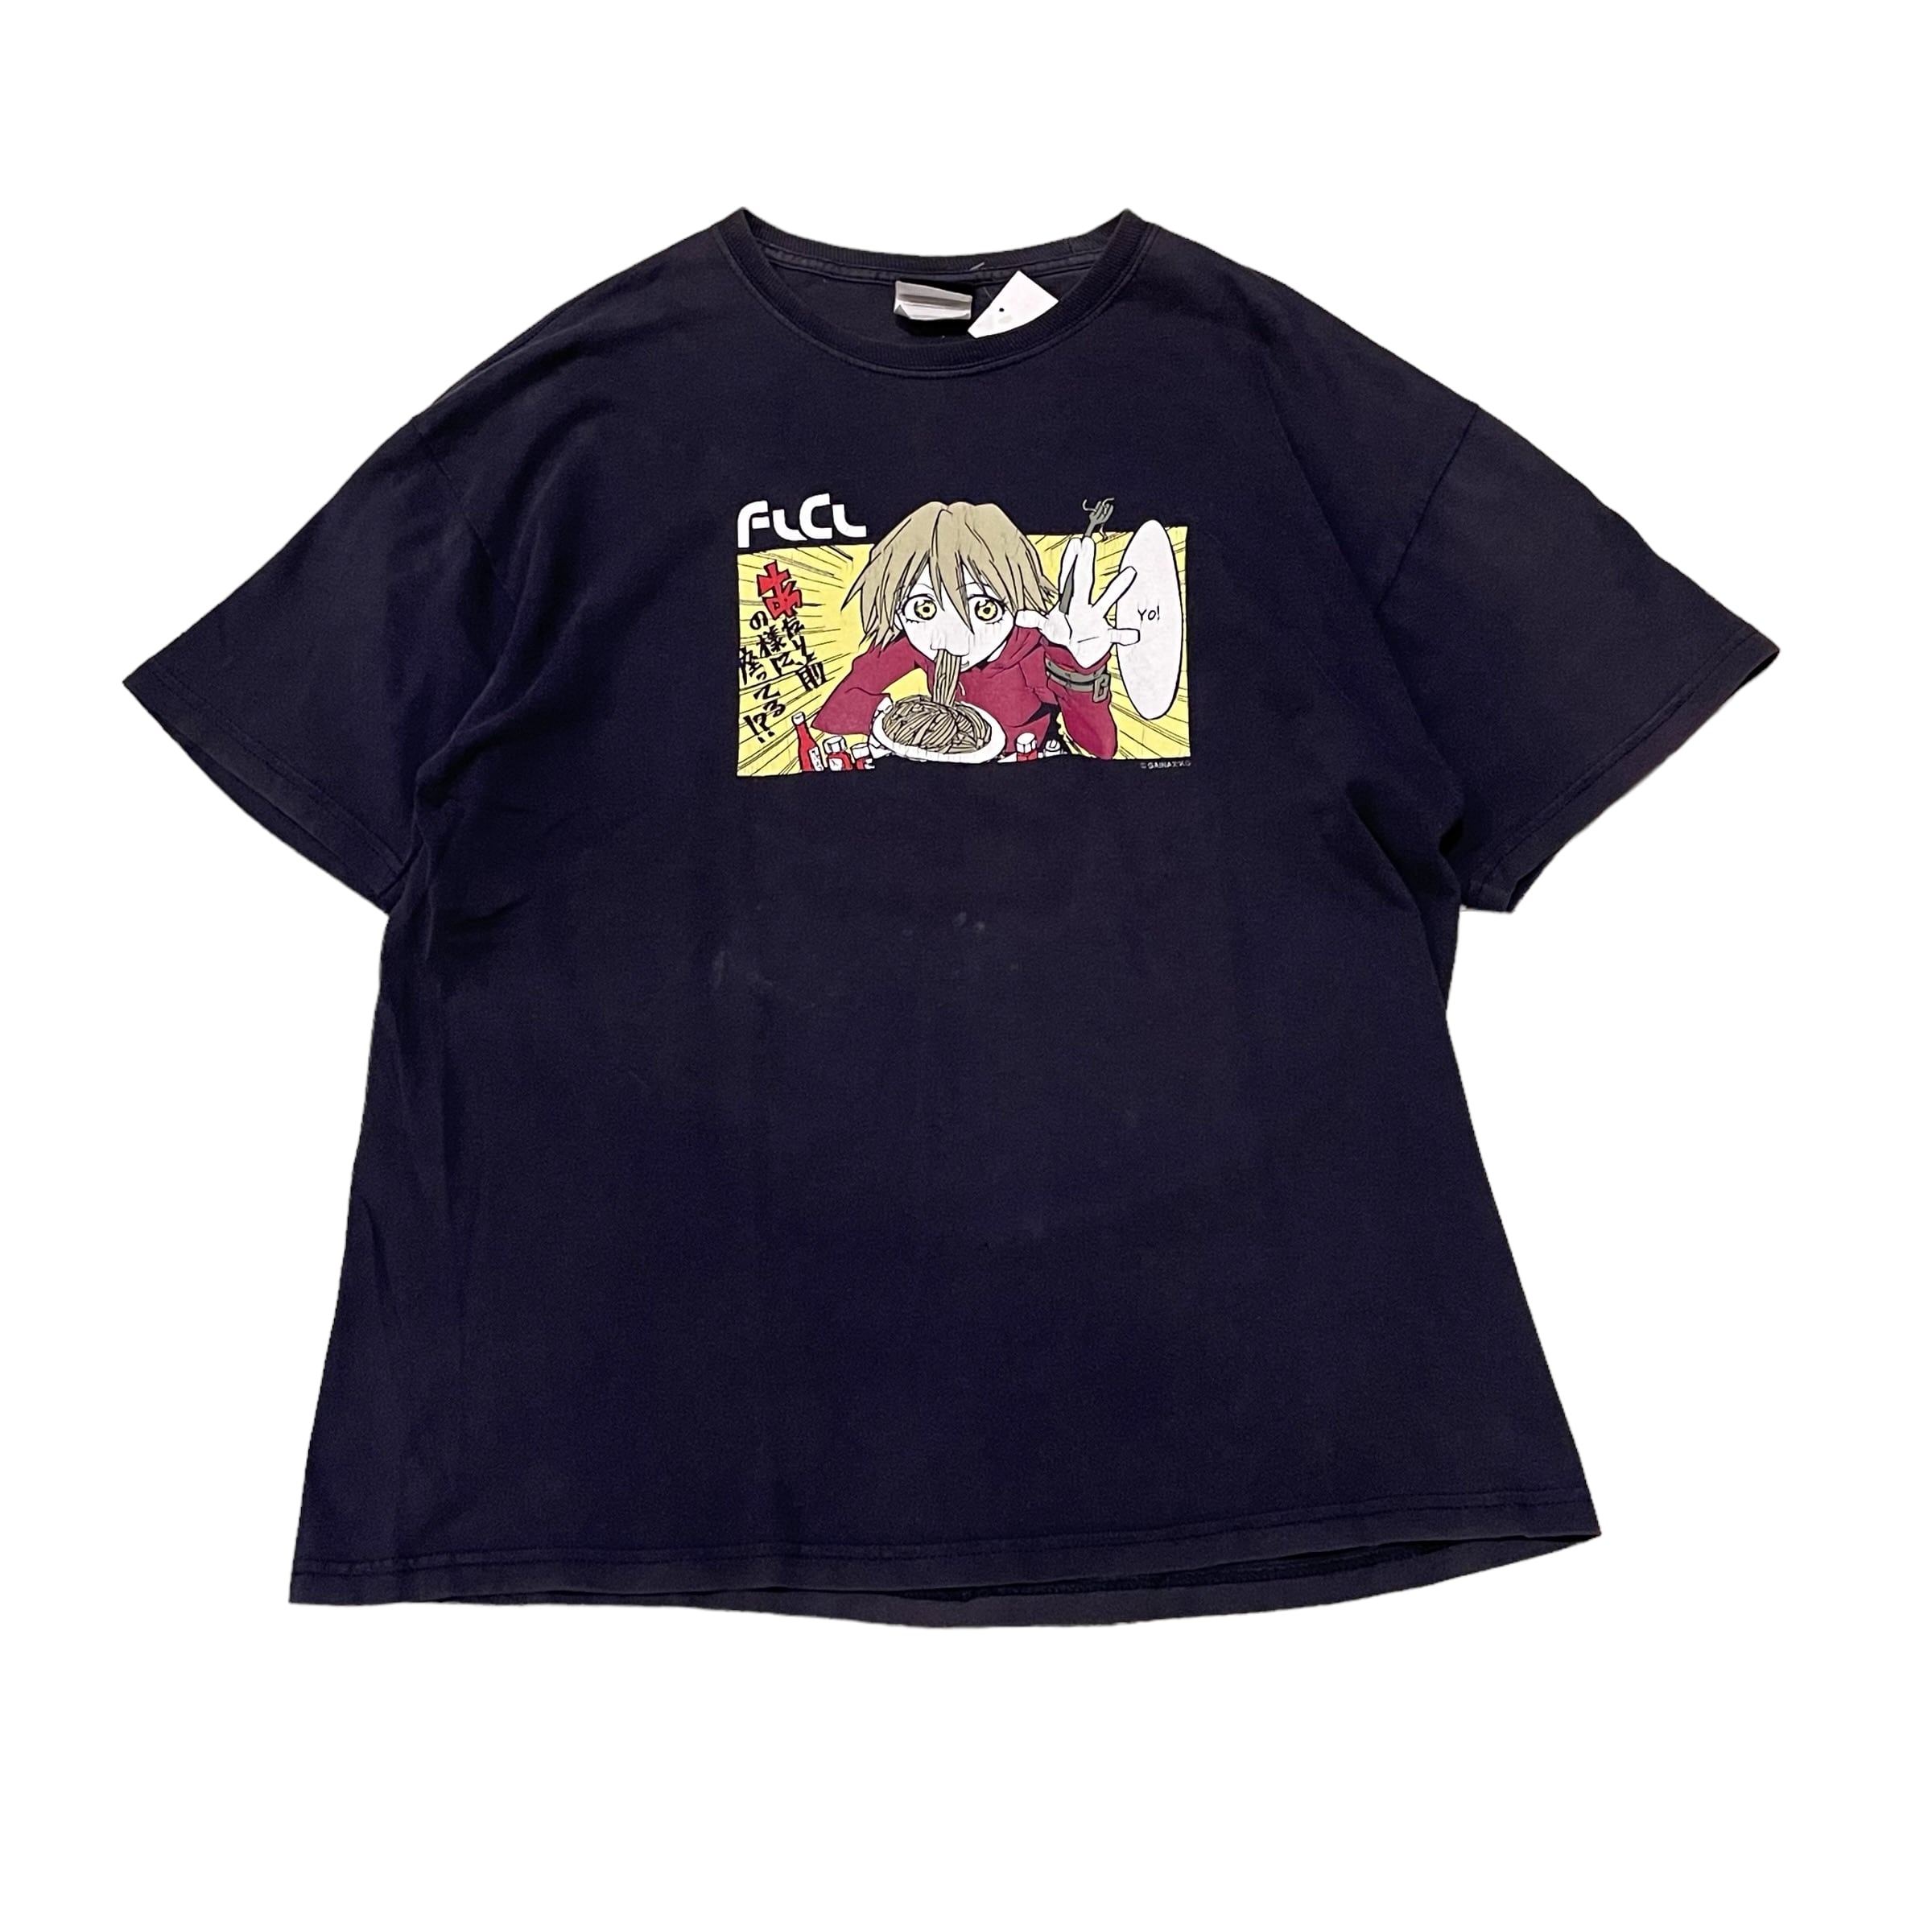 90s FLCL t-shirt | What'z up